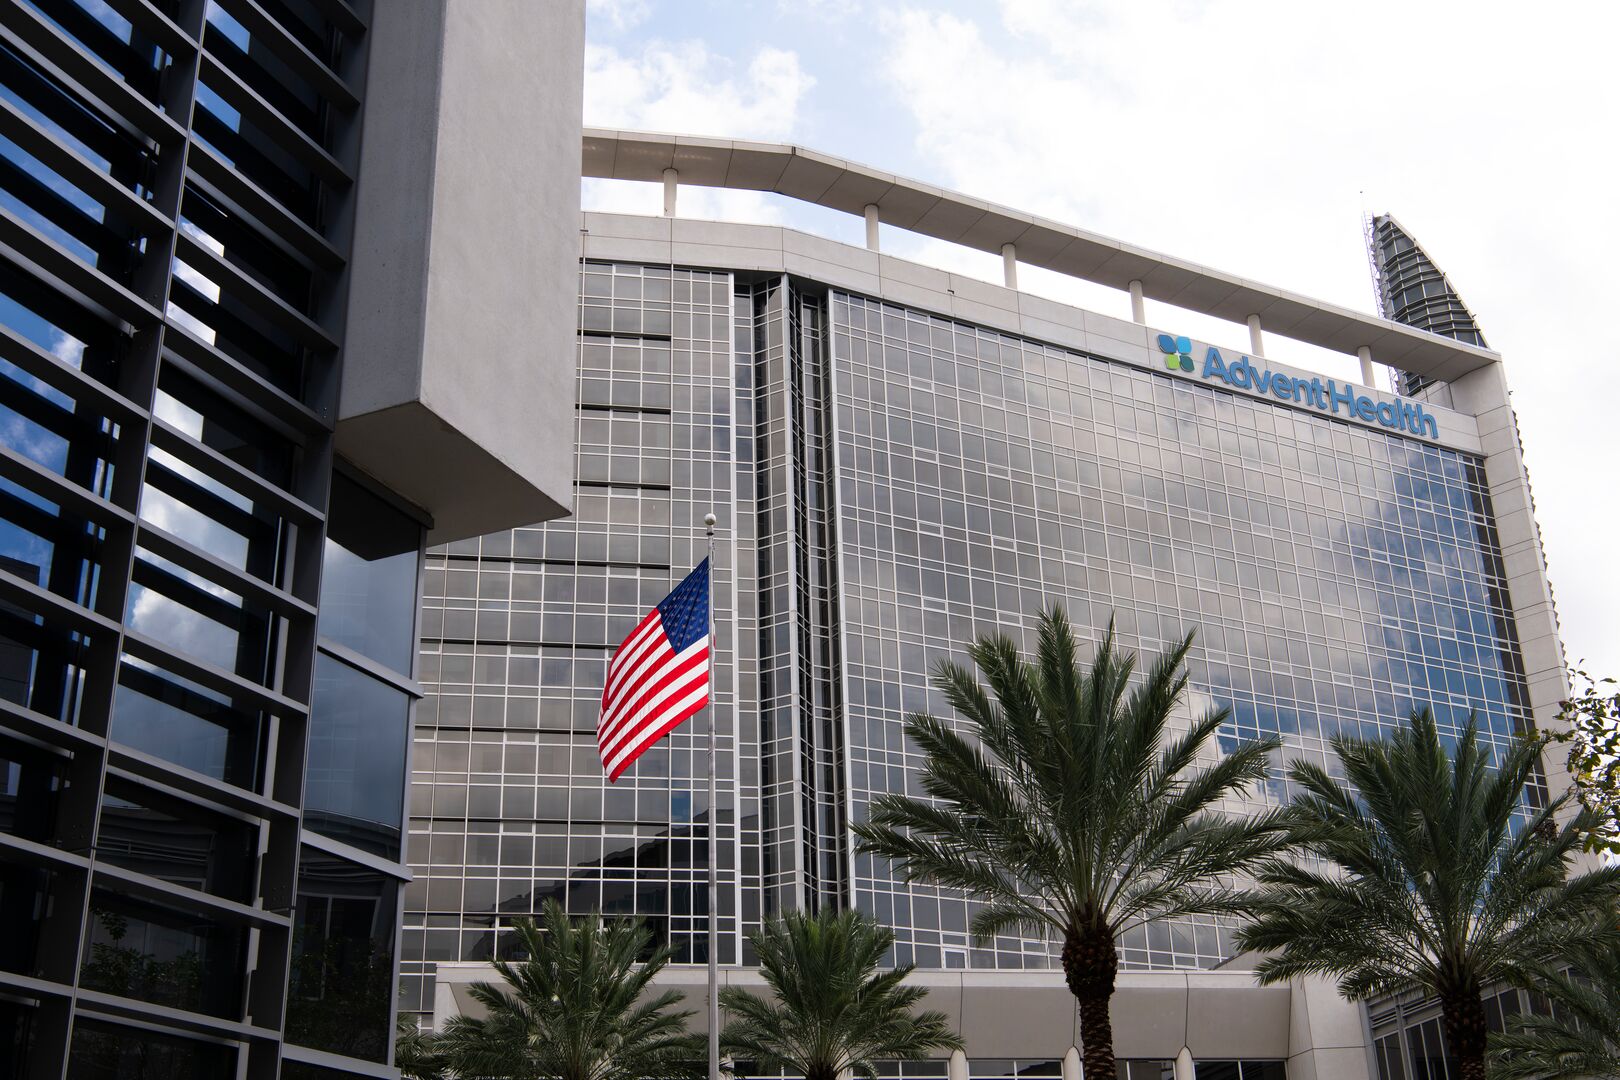 AdventHealth building in central Florida